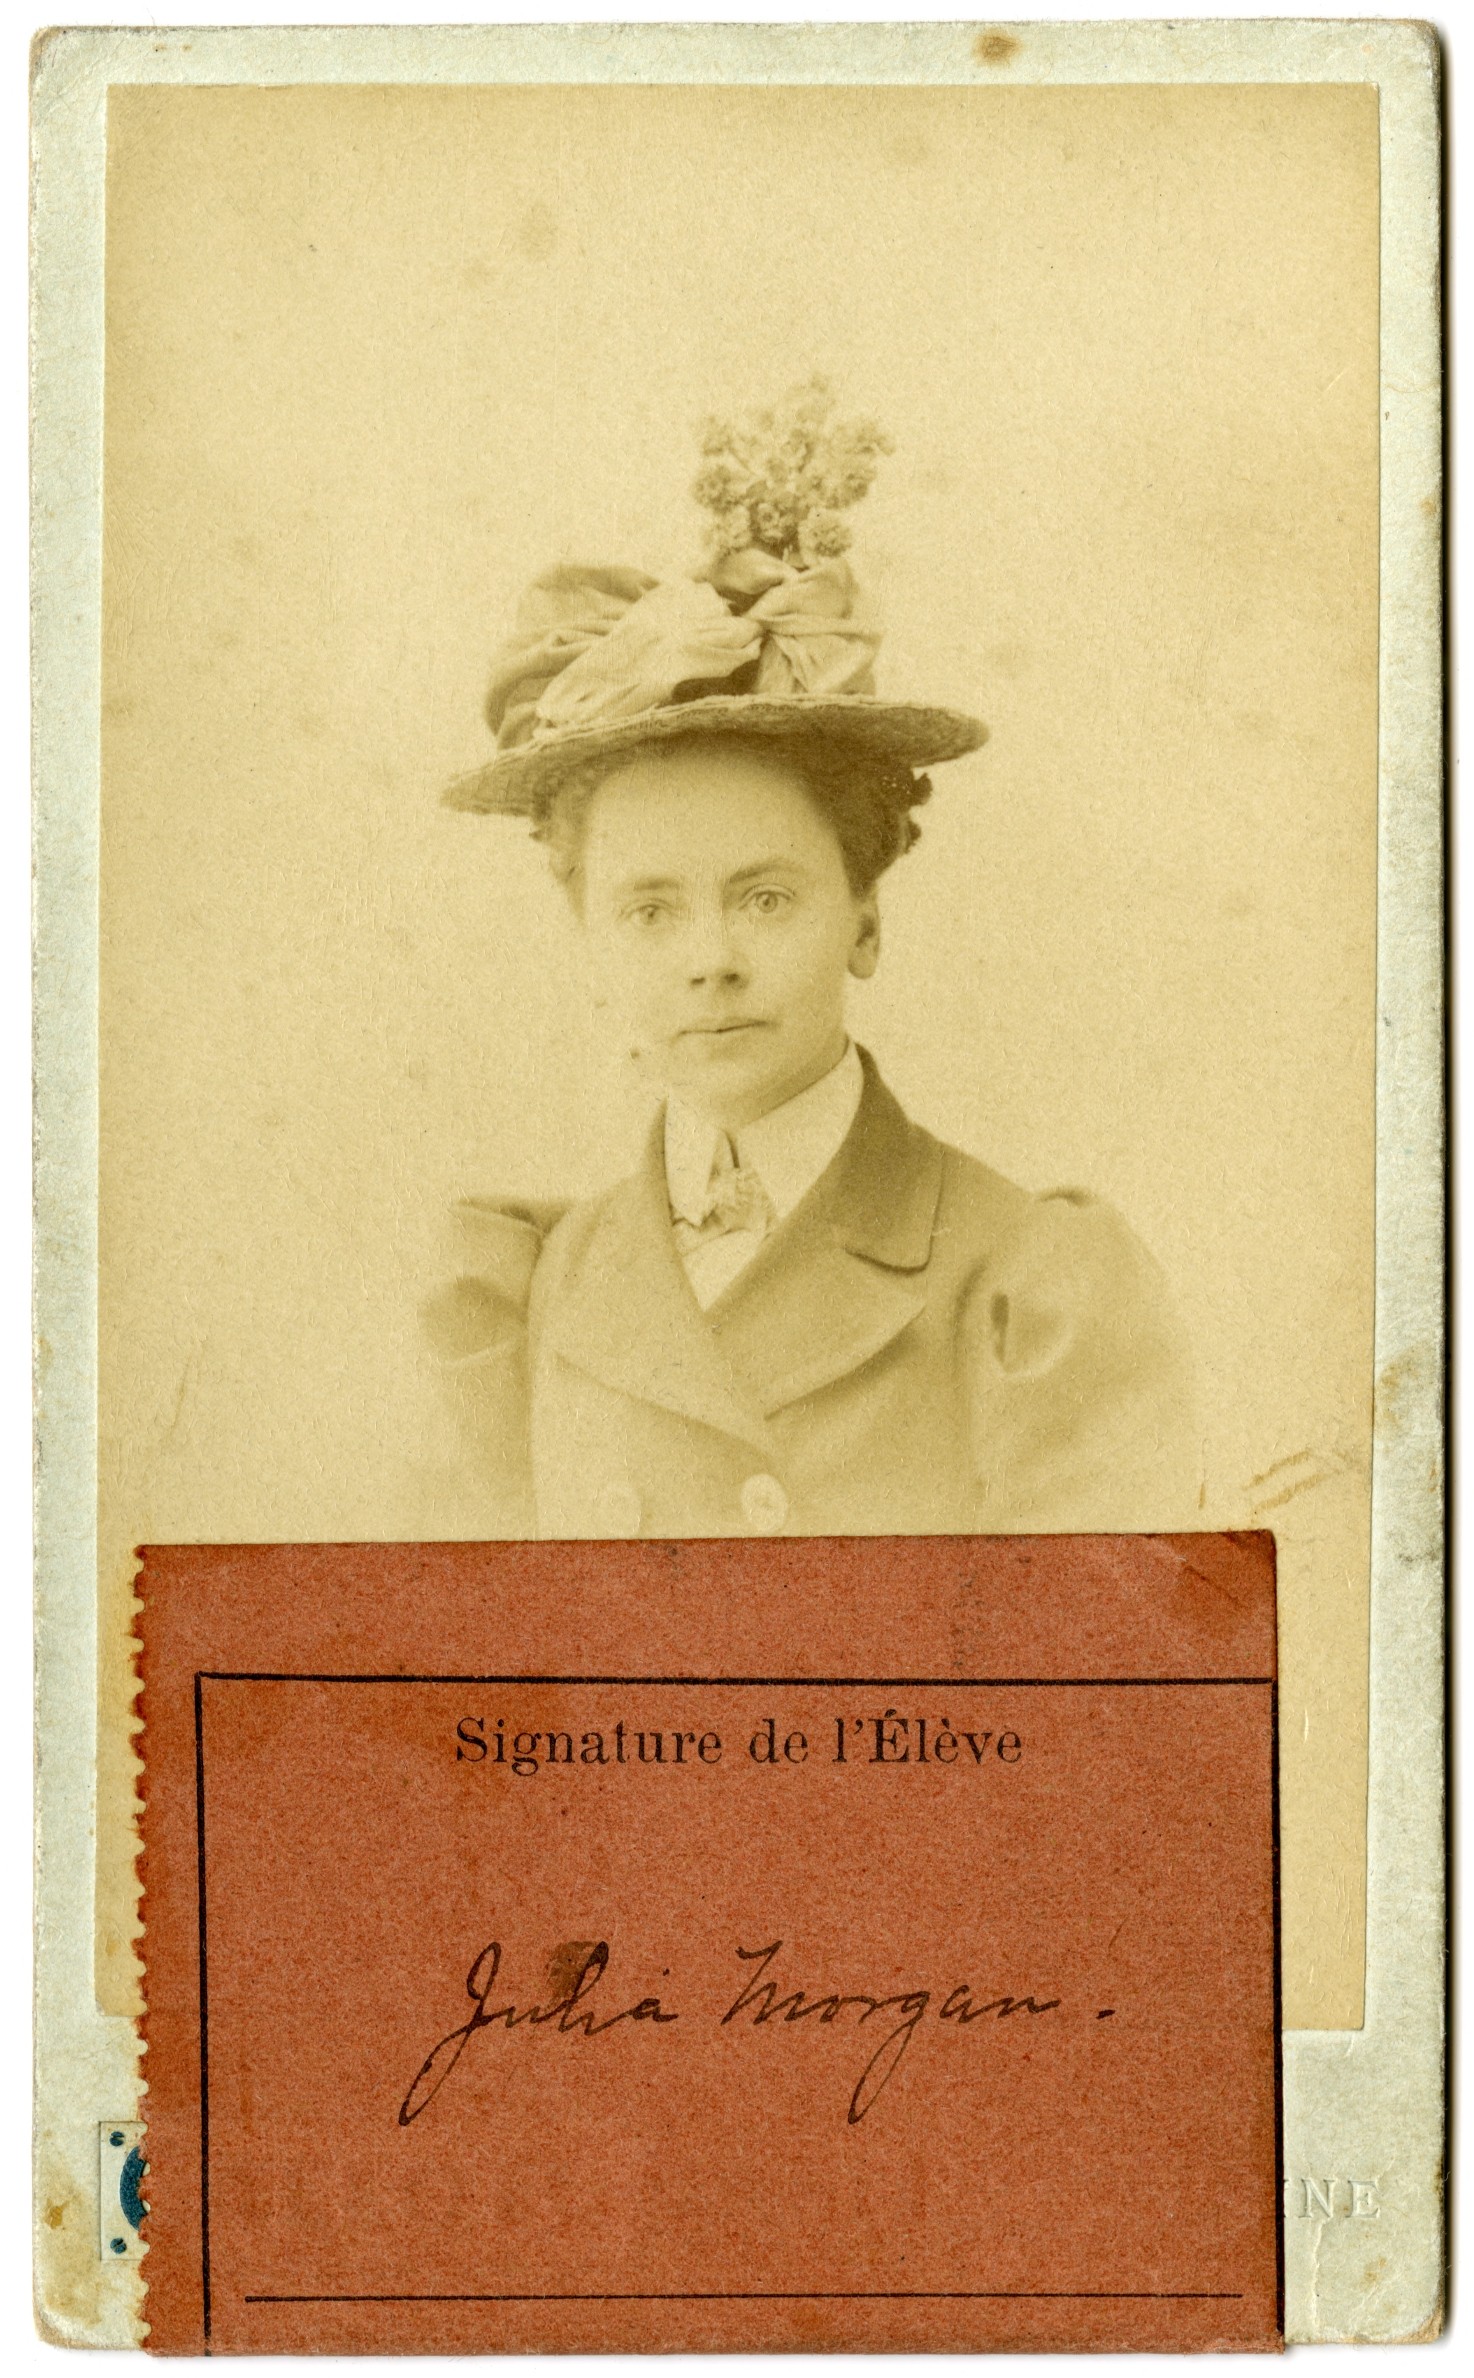 Julia Morgan, student card from the Ecole des Beaux-Arts in Paris, 1899 © Courtesy of Special Collections, California Polytechnic State University